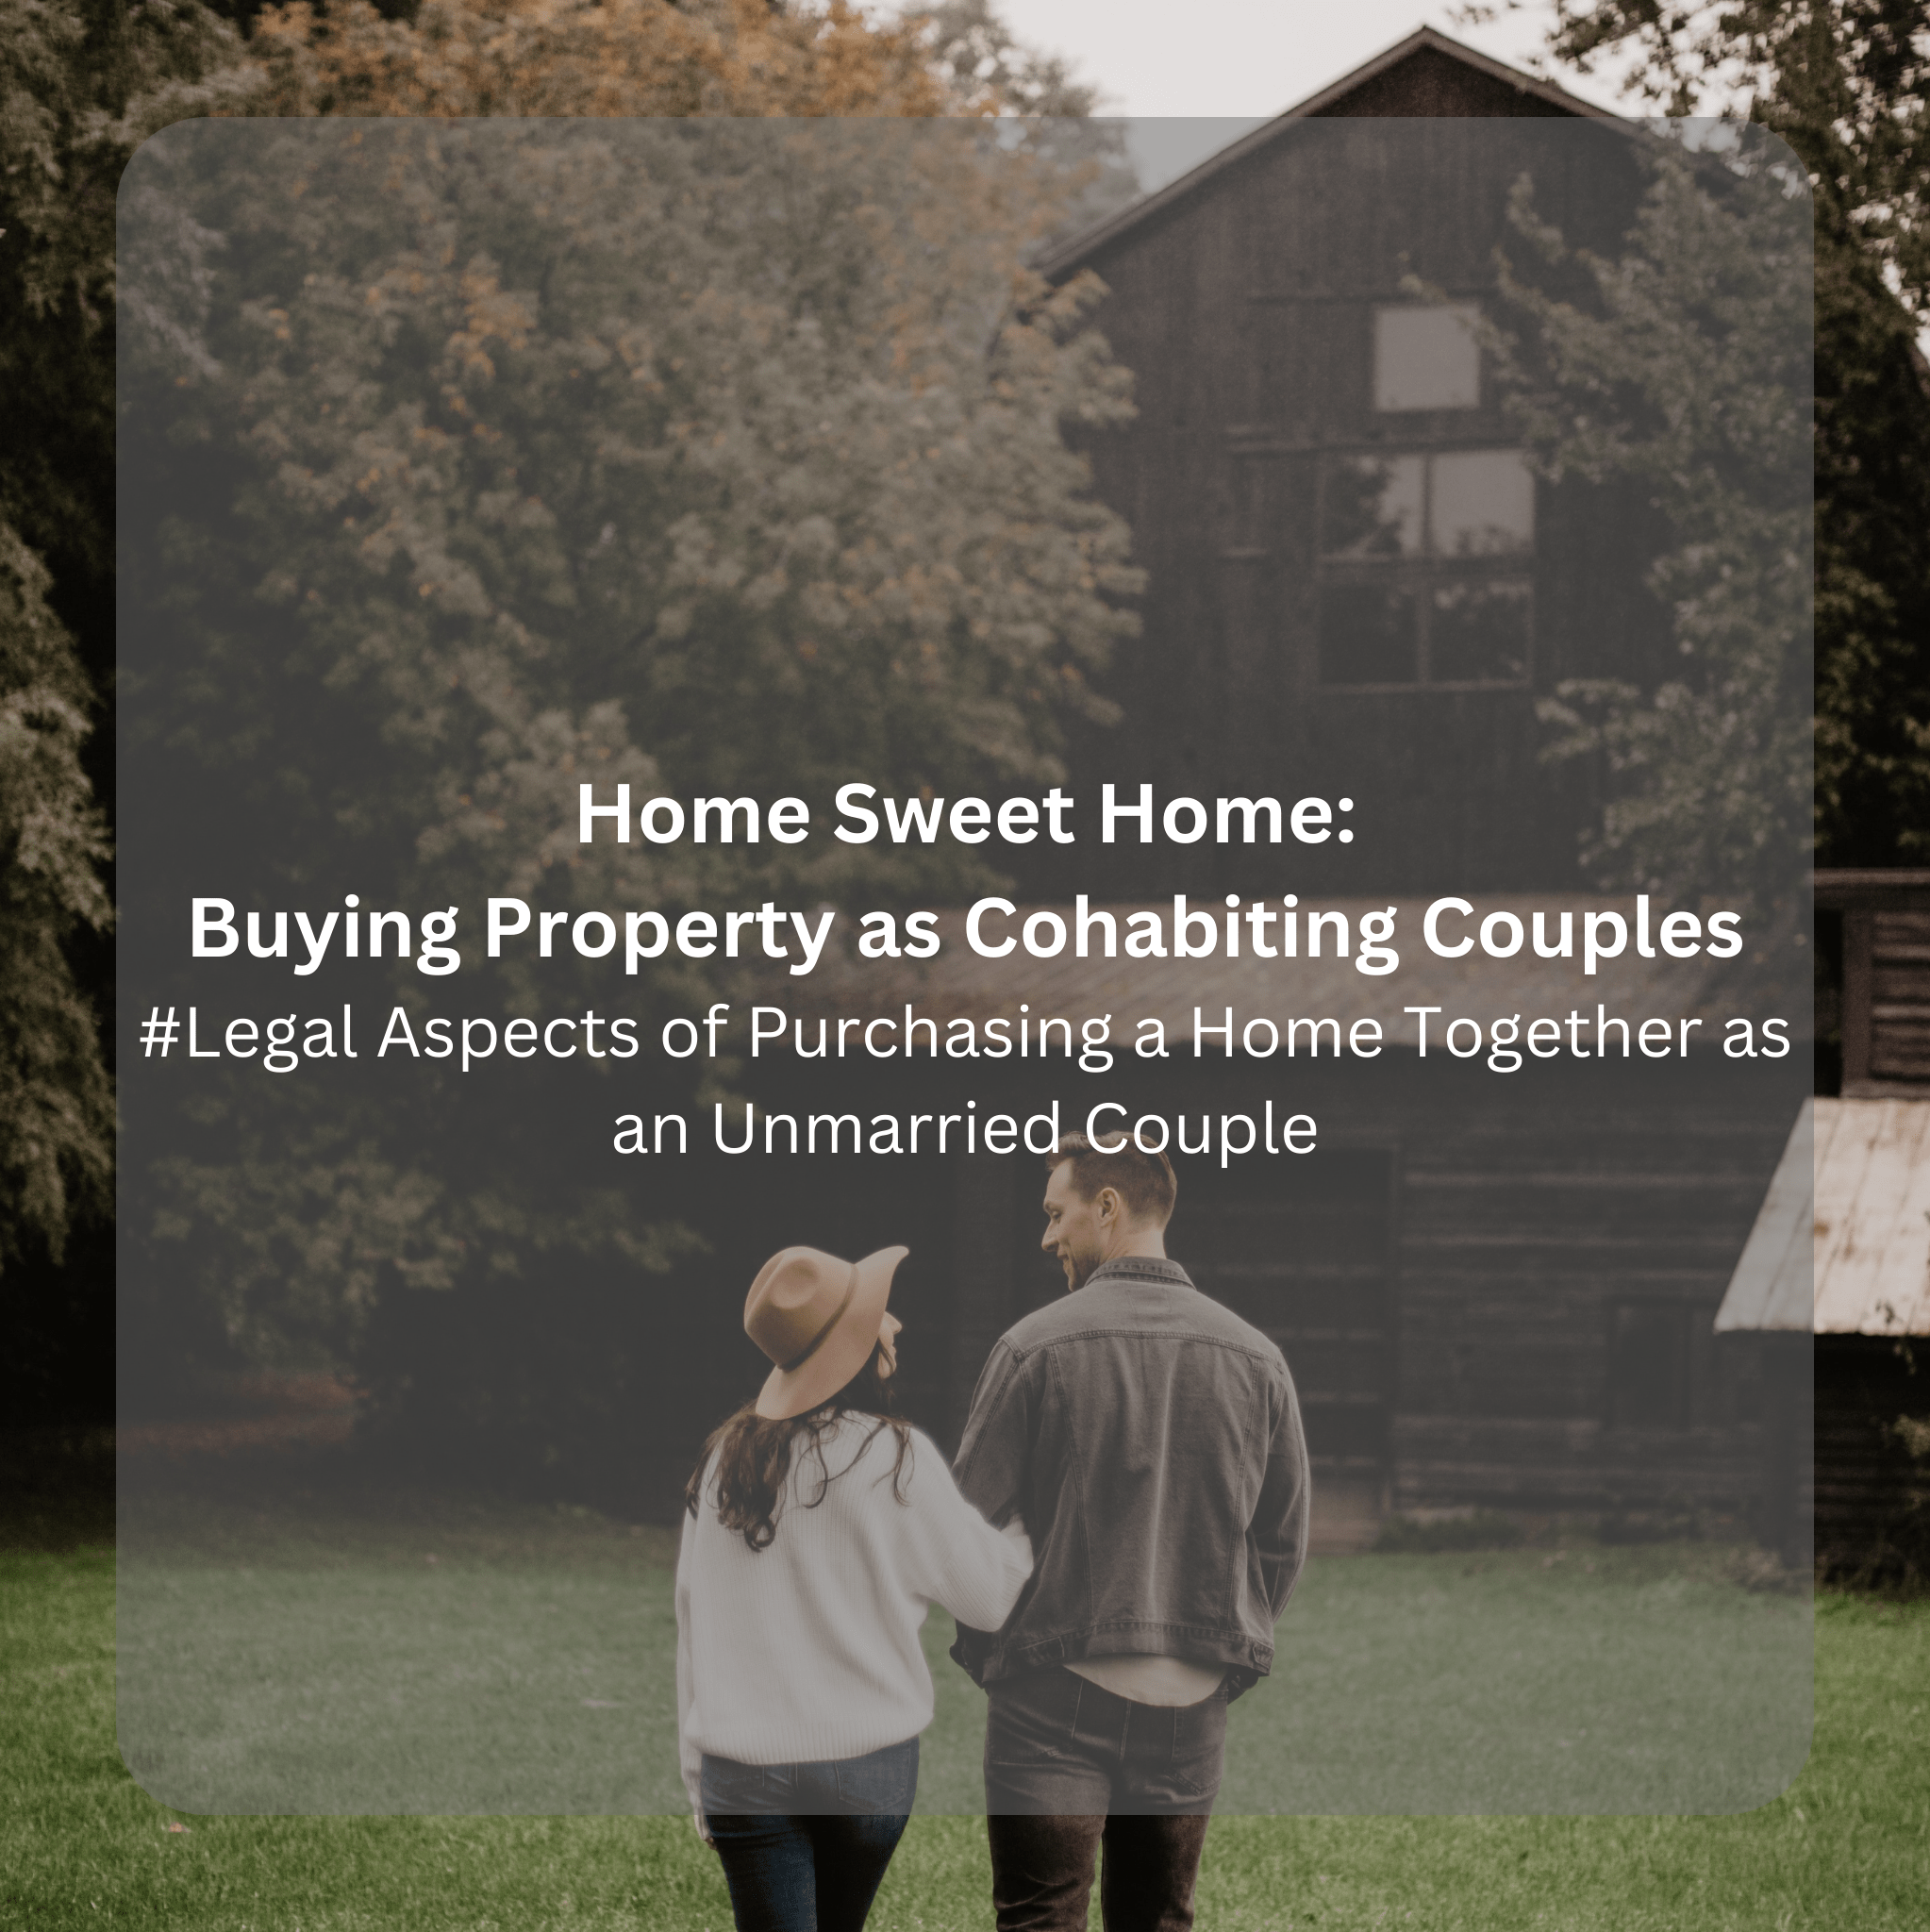 Home Sweet Home: Buying Property as Cohabiting Couples